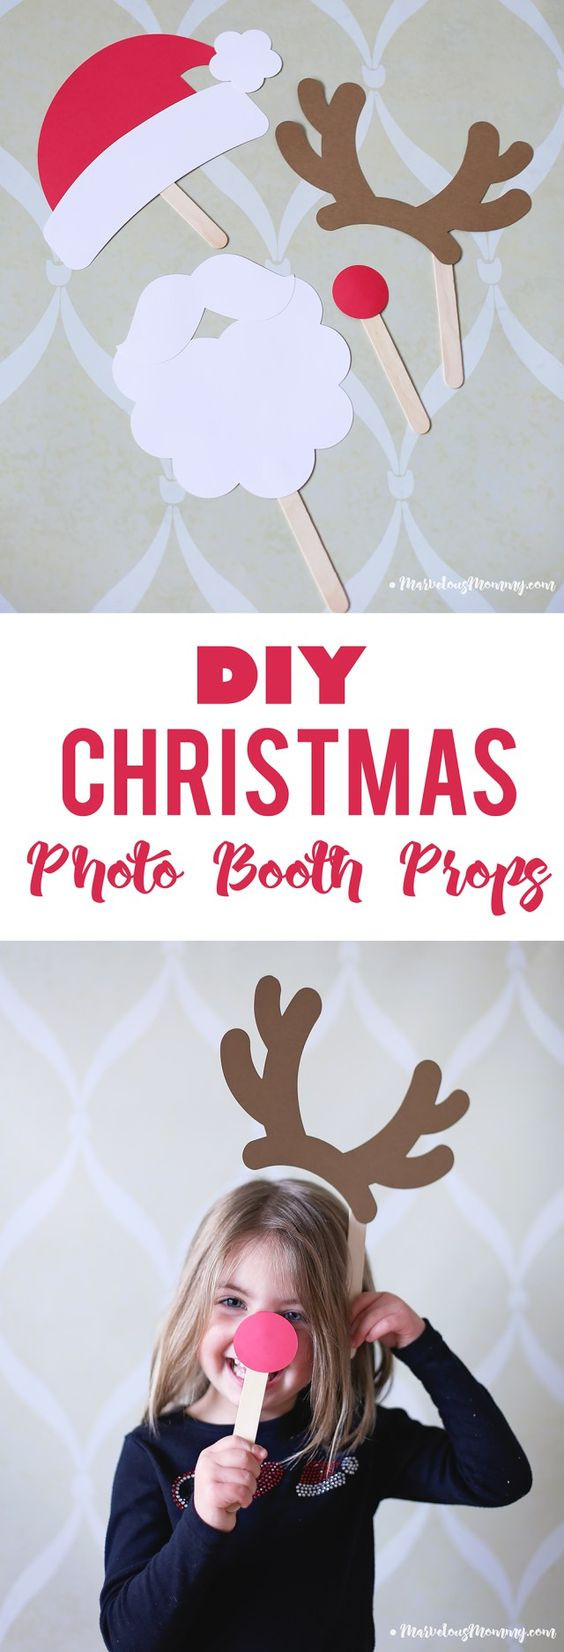 DIY Christmas Photo Props
 booth props Christmas photo booth props and